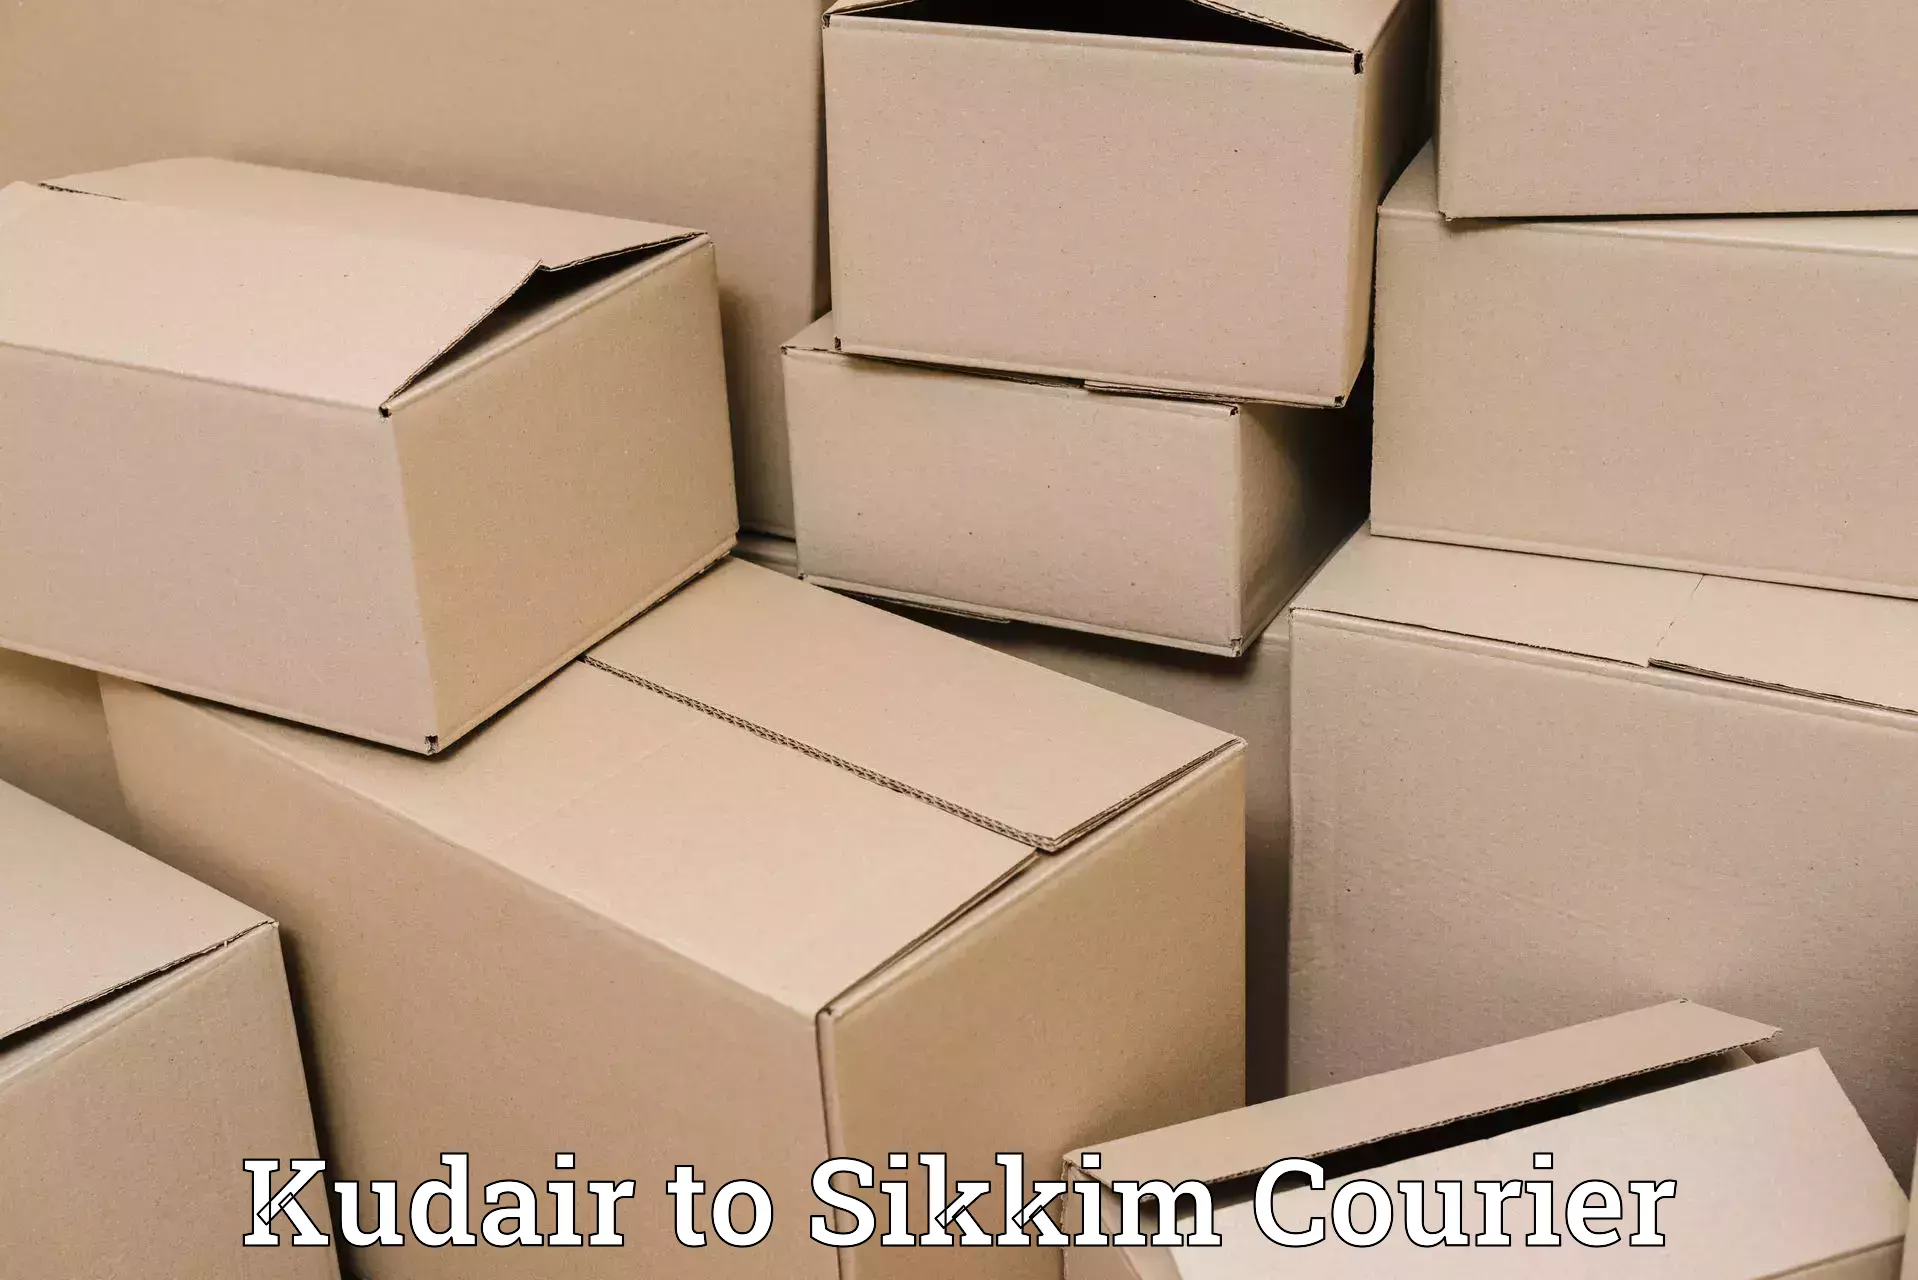 Enhanced shipping experience Kudair to North Sikkim